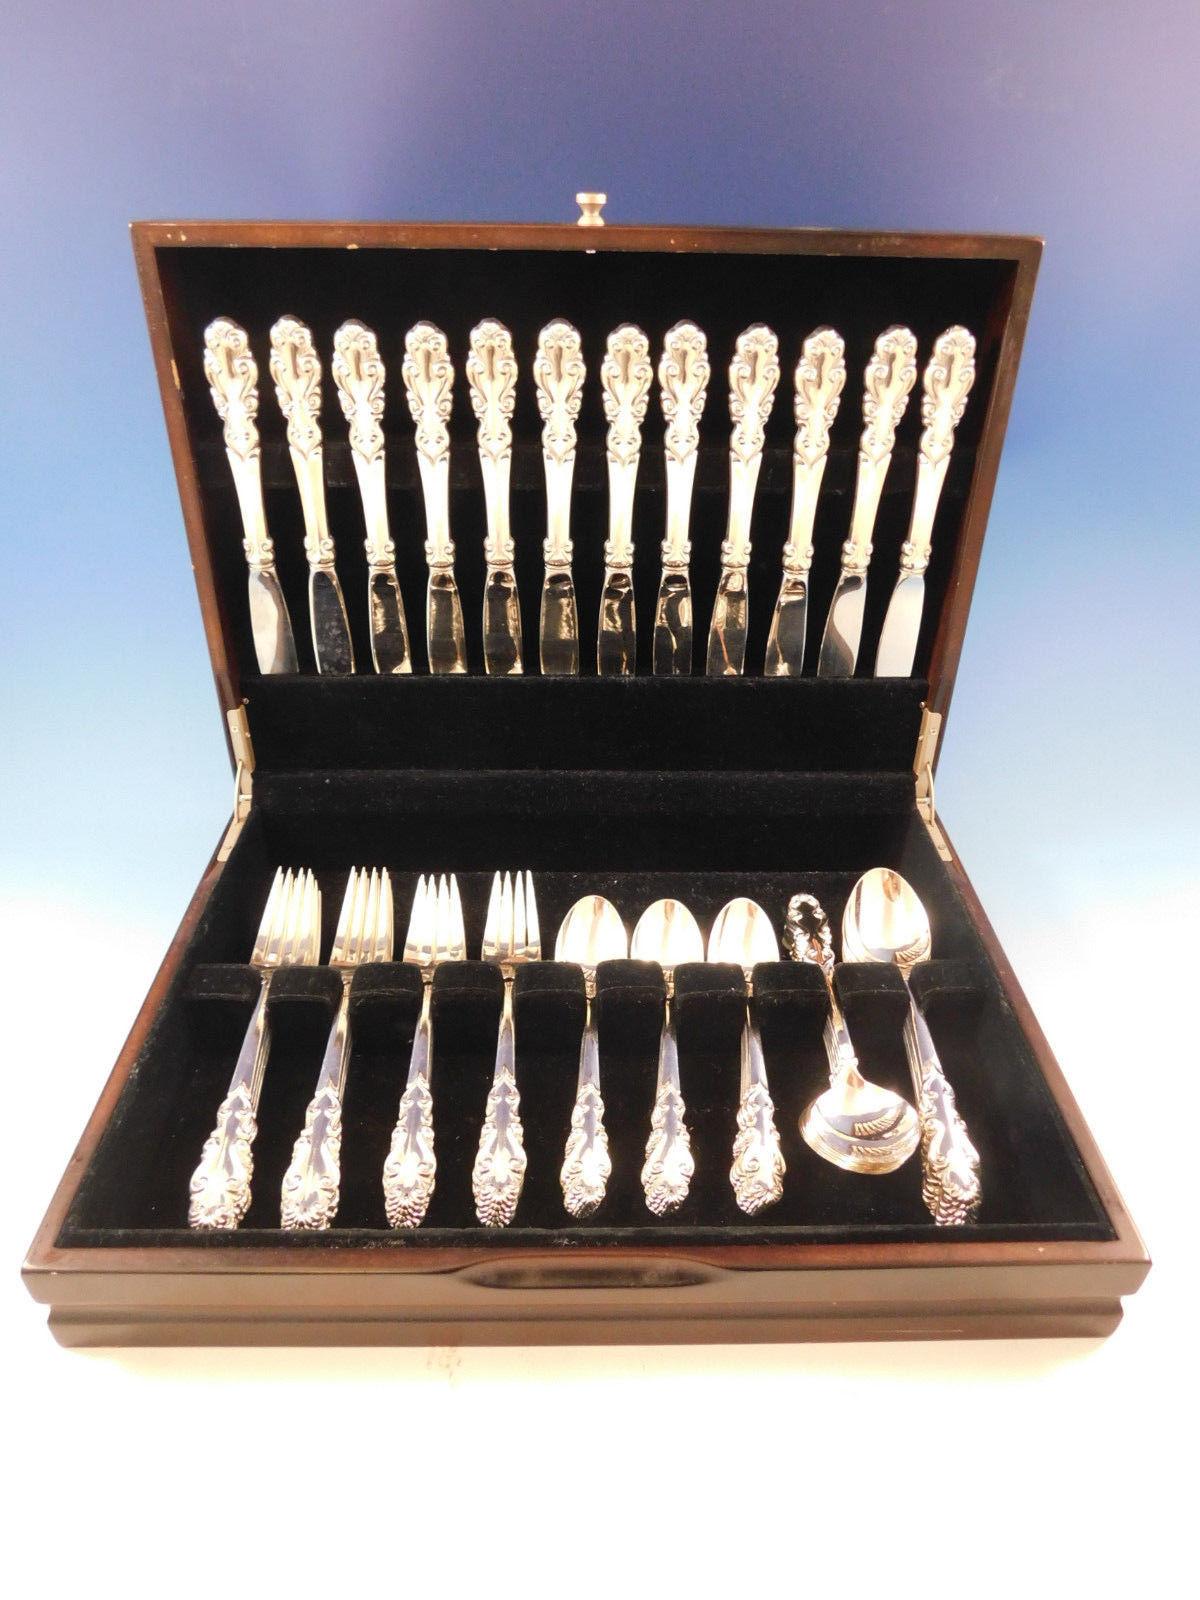 Esplanade by Towle sterling silver flatware set of 60 pieces. This set includes:

12 knives, 8 7/8